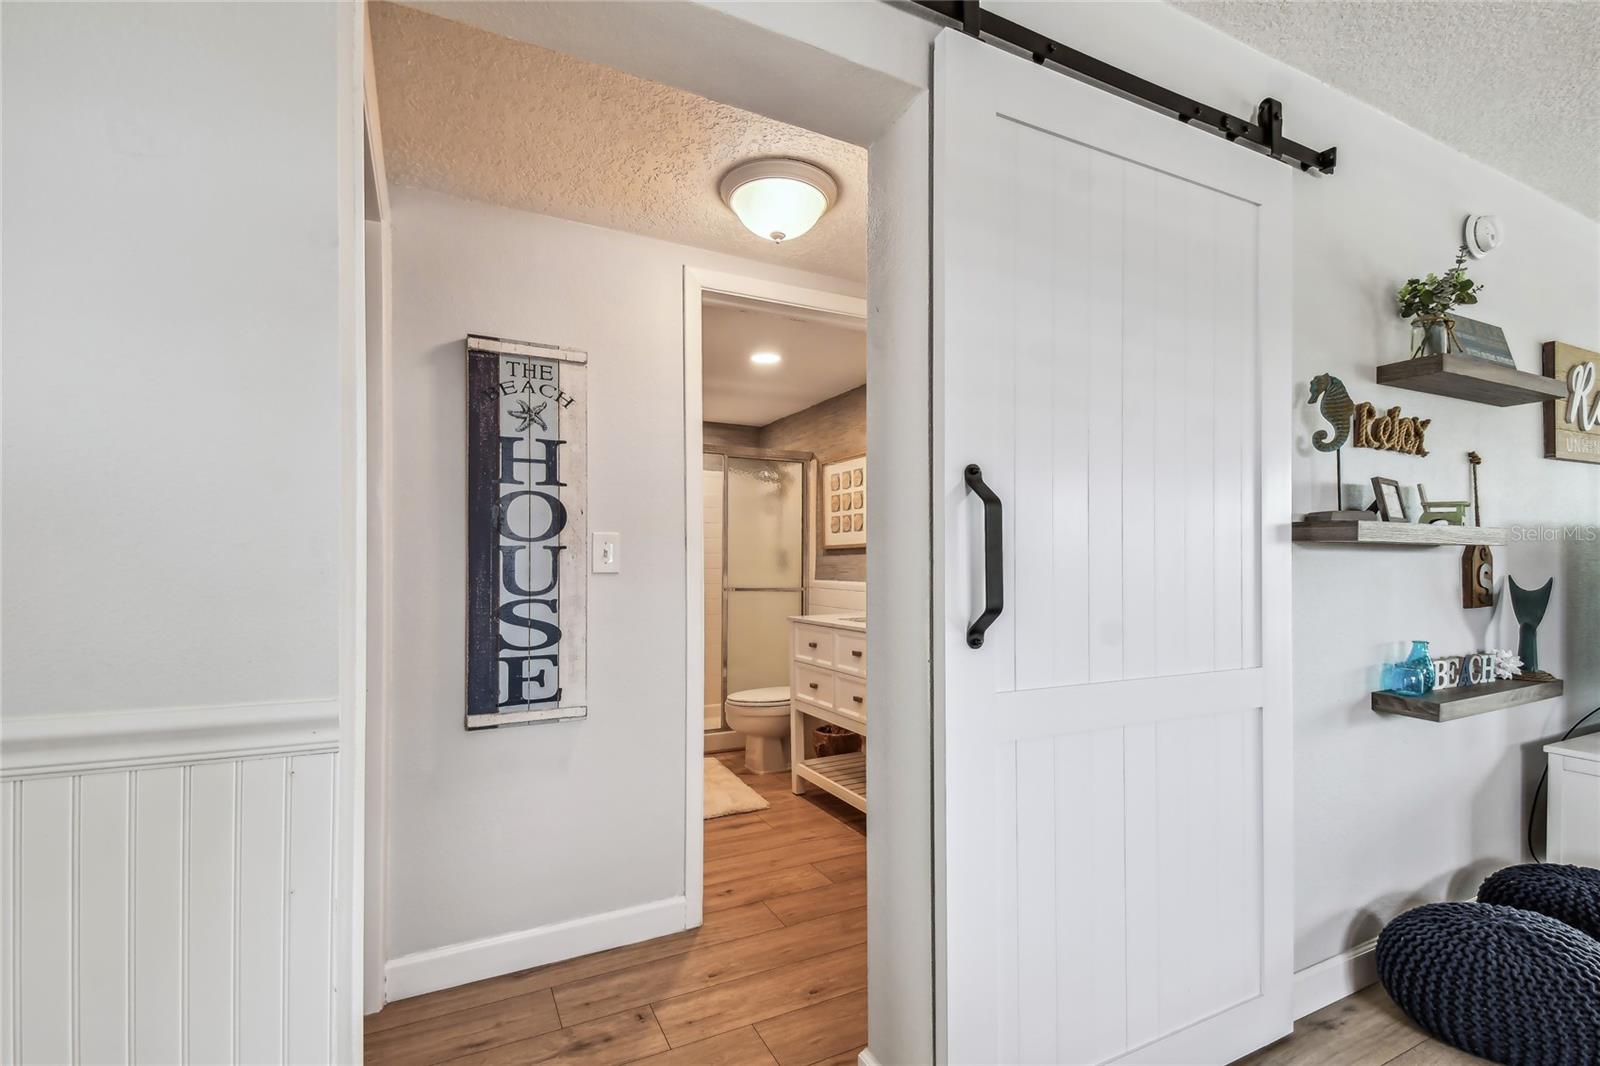 Barn door can close to give your guest privacy.